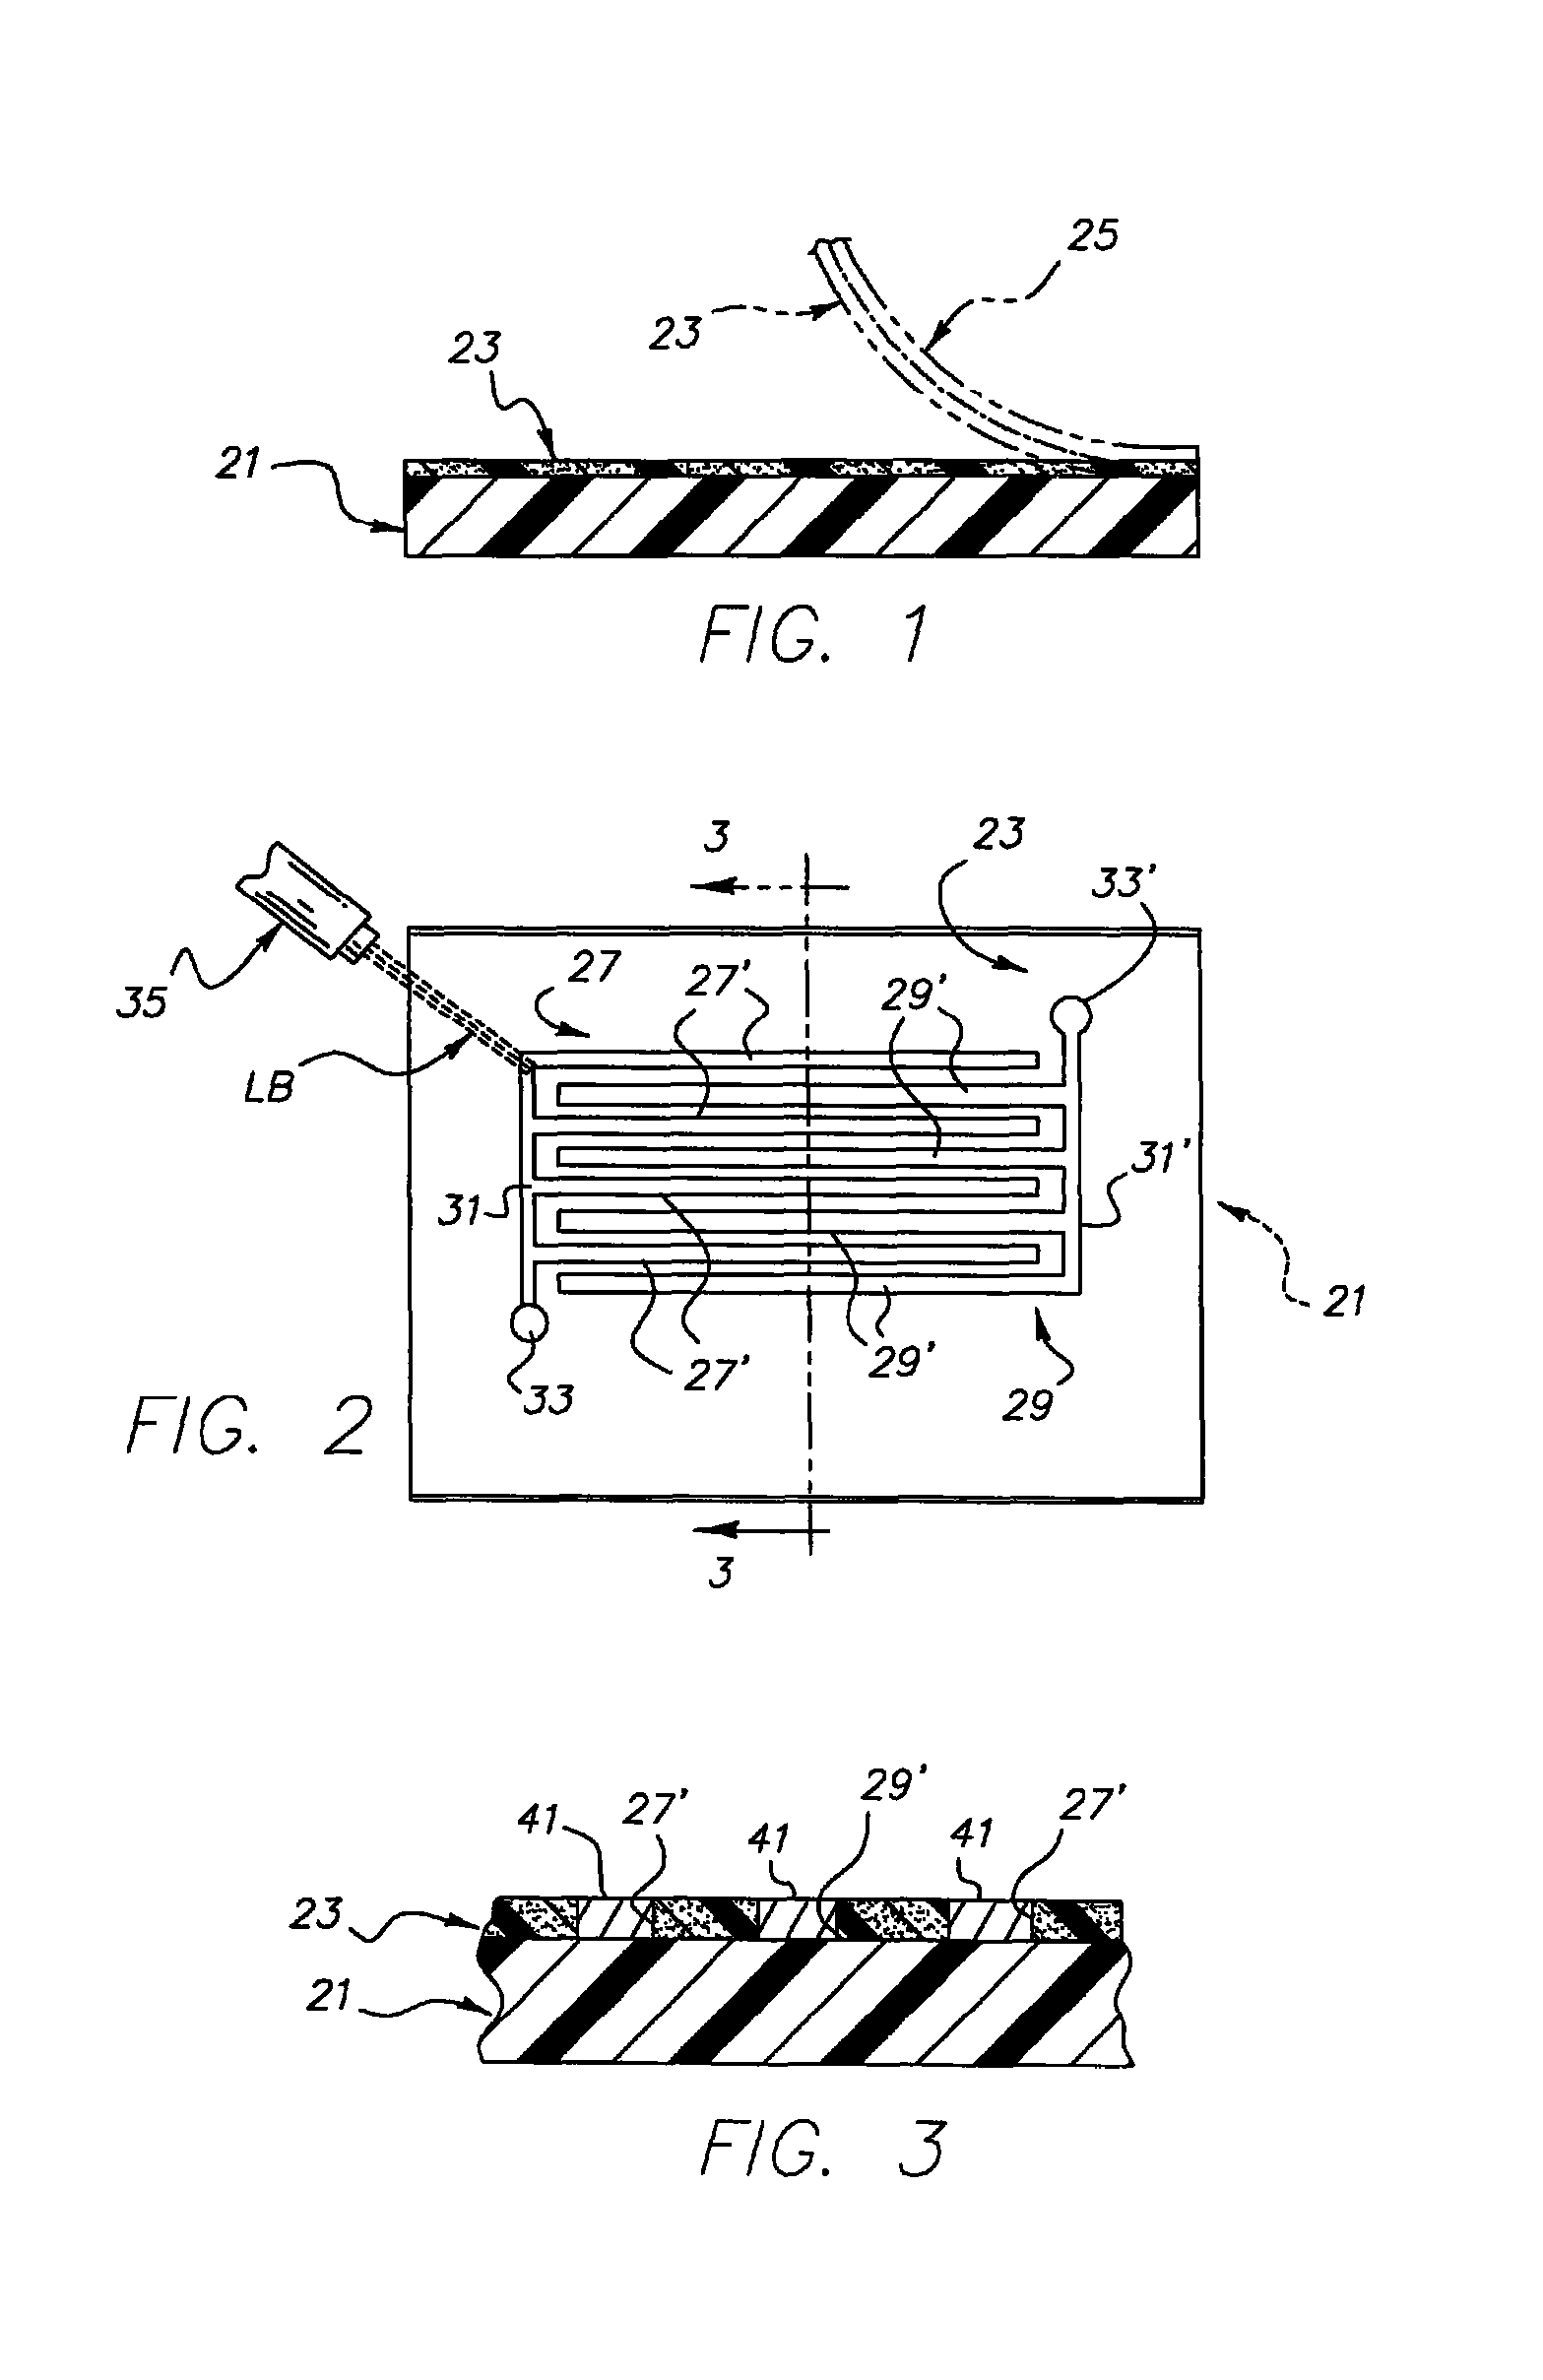 Substrate having internal capacitor and method of making same